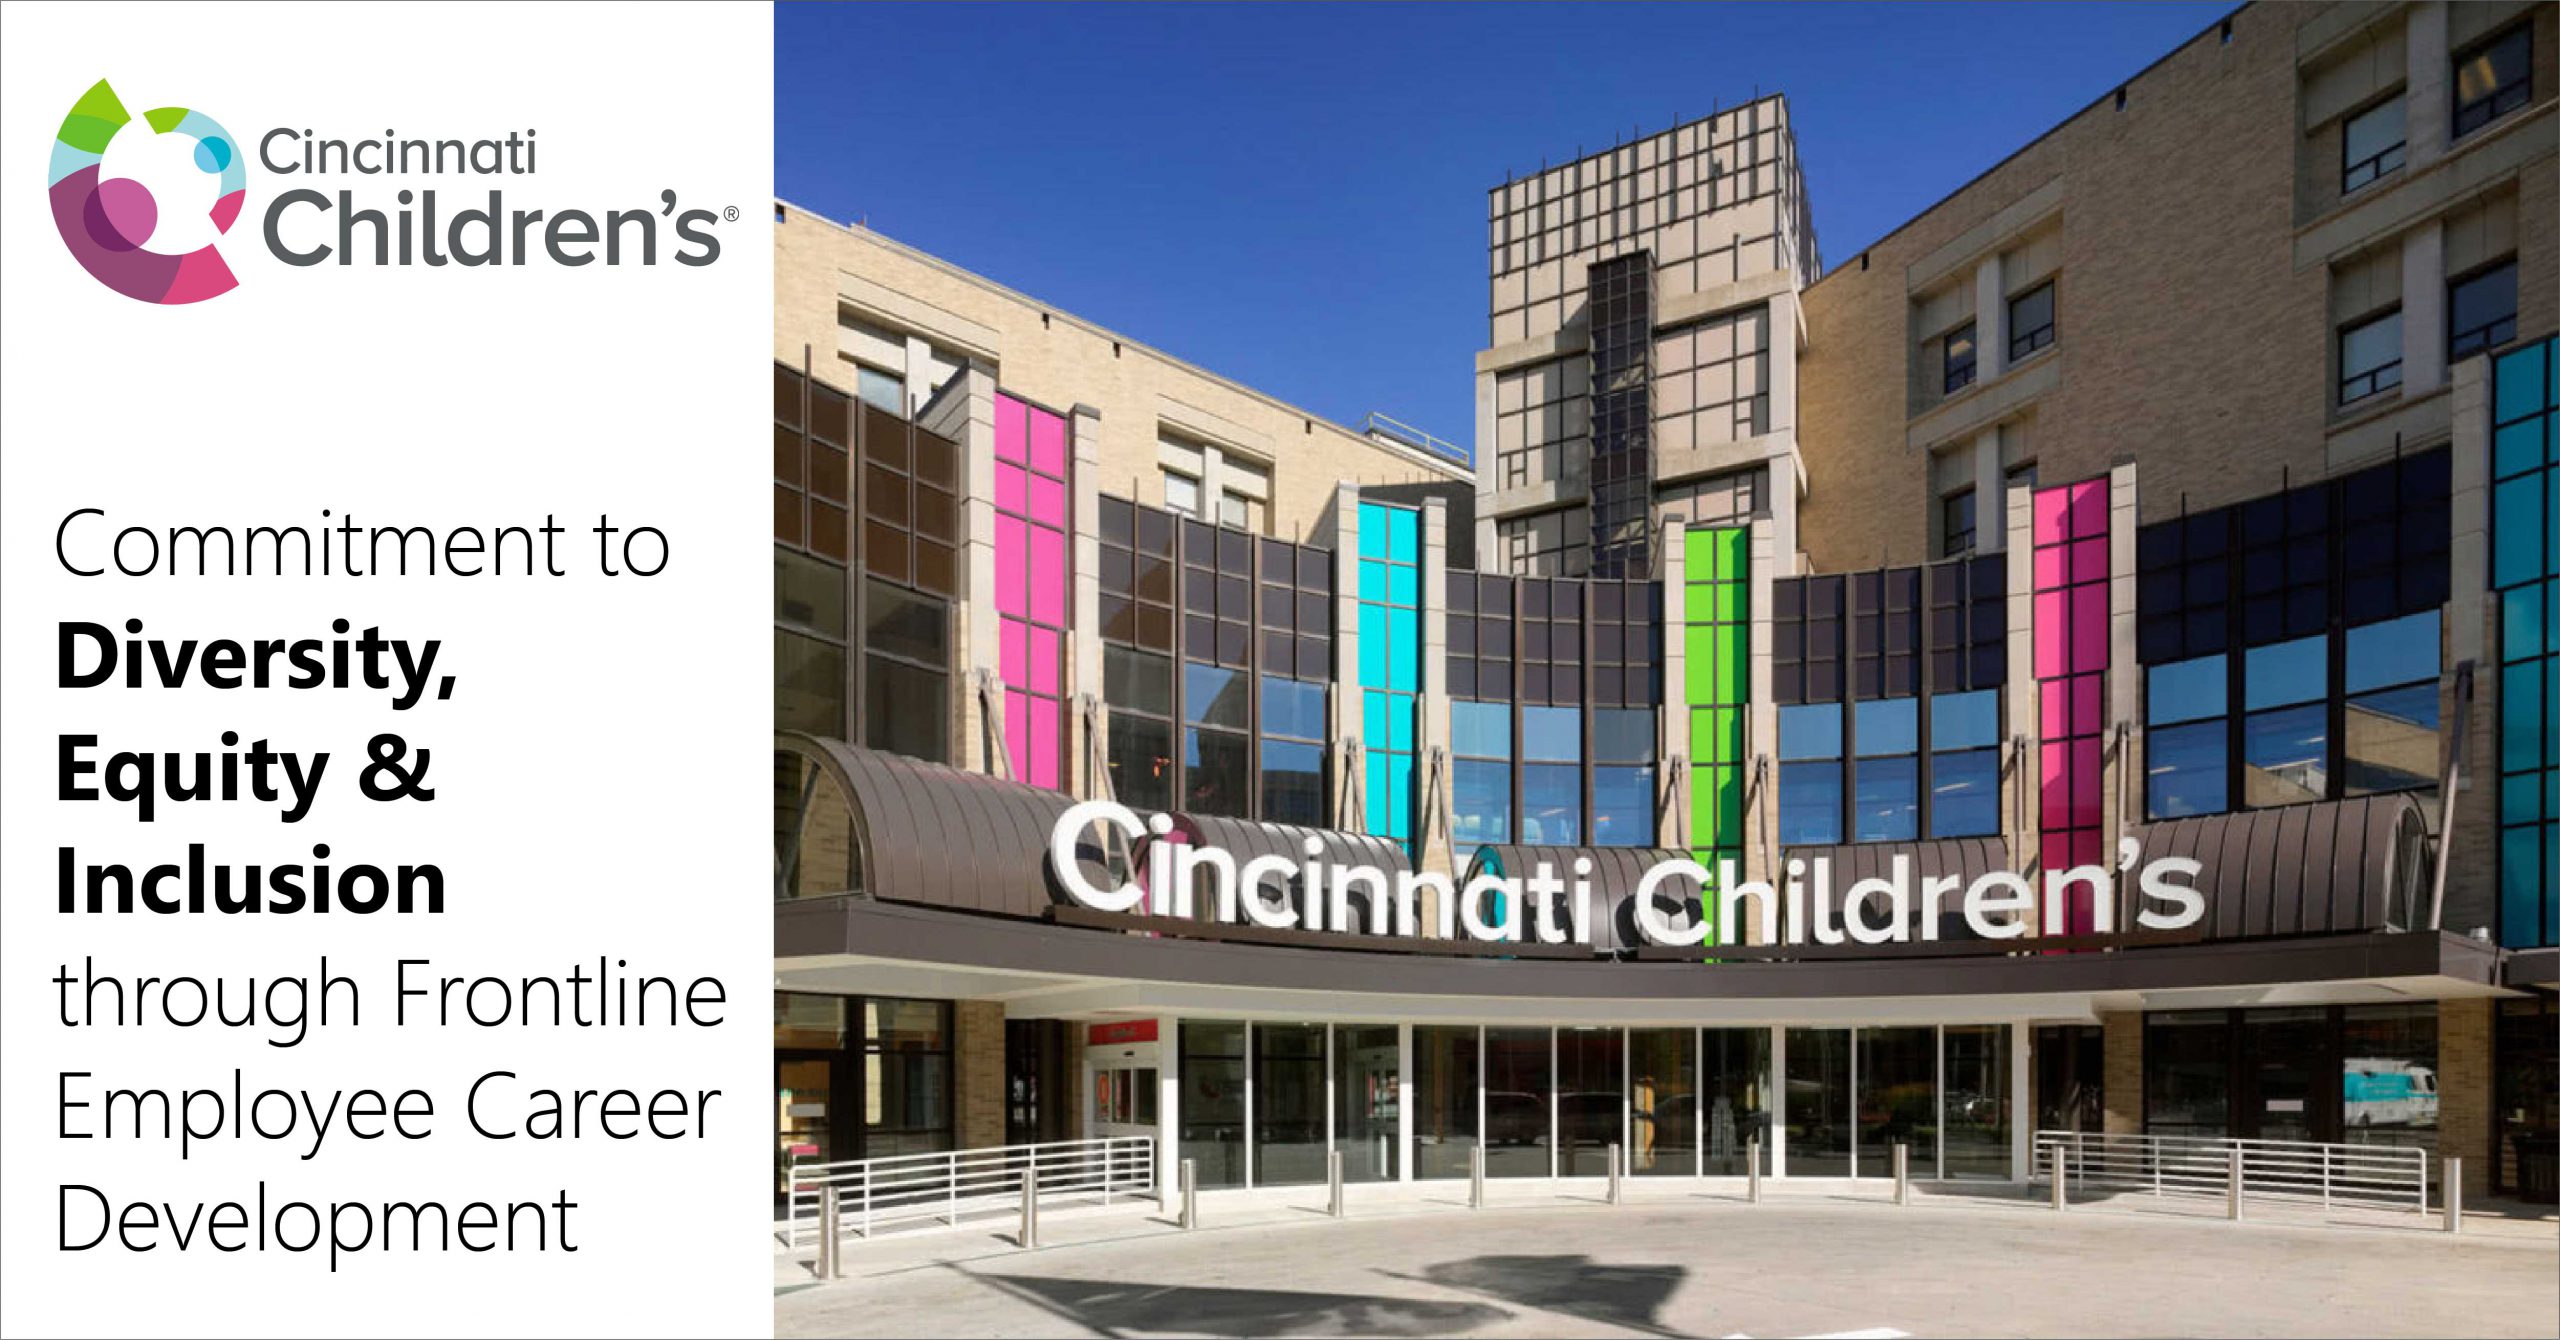 Cincinnati Children's Hospital Medical Center main entrance shown. The name of the hospital is in a curving arch. There are 4 banners of color running vertically (orange, blue, green, and red). The sky is a bright blue in the background. No people are shown.